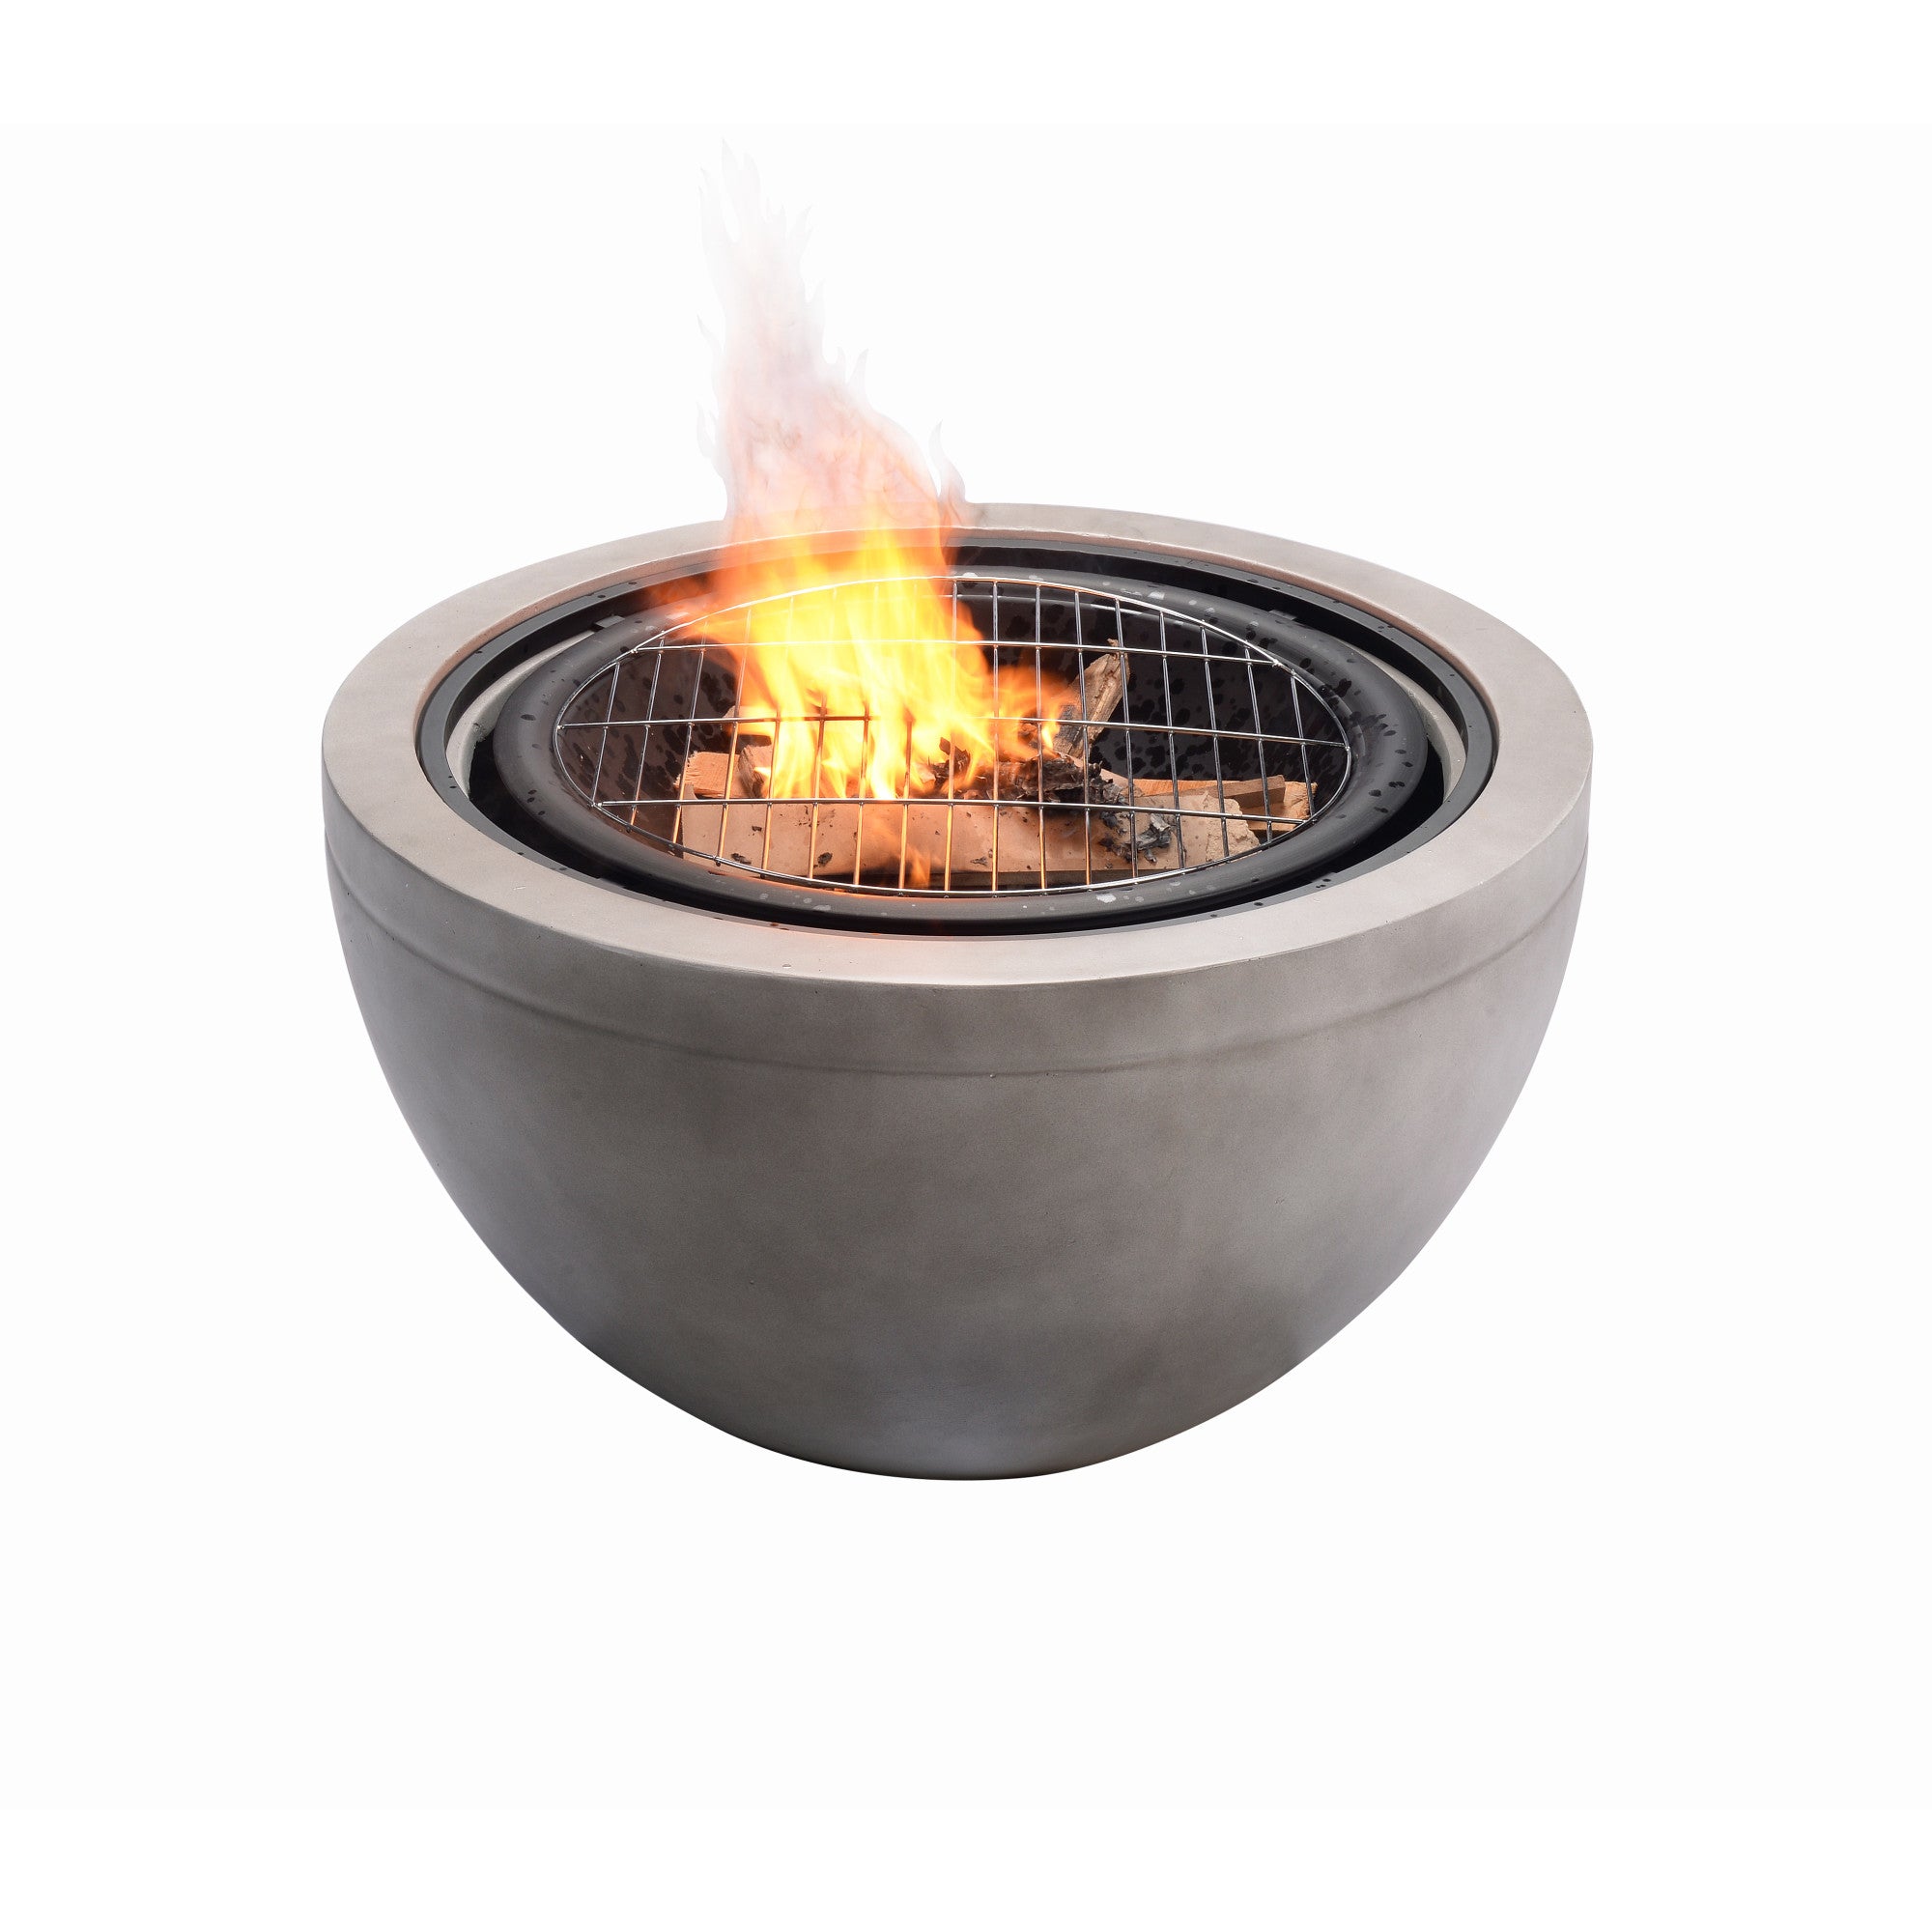 Teamson Home 30" Outdoor Round Wood Burning Fire Pit with Faux Concrete Base, Gray